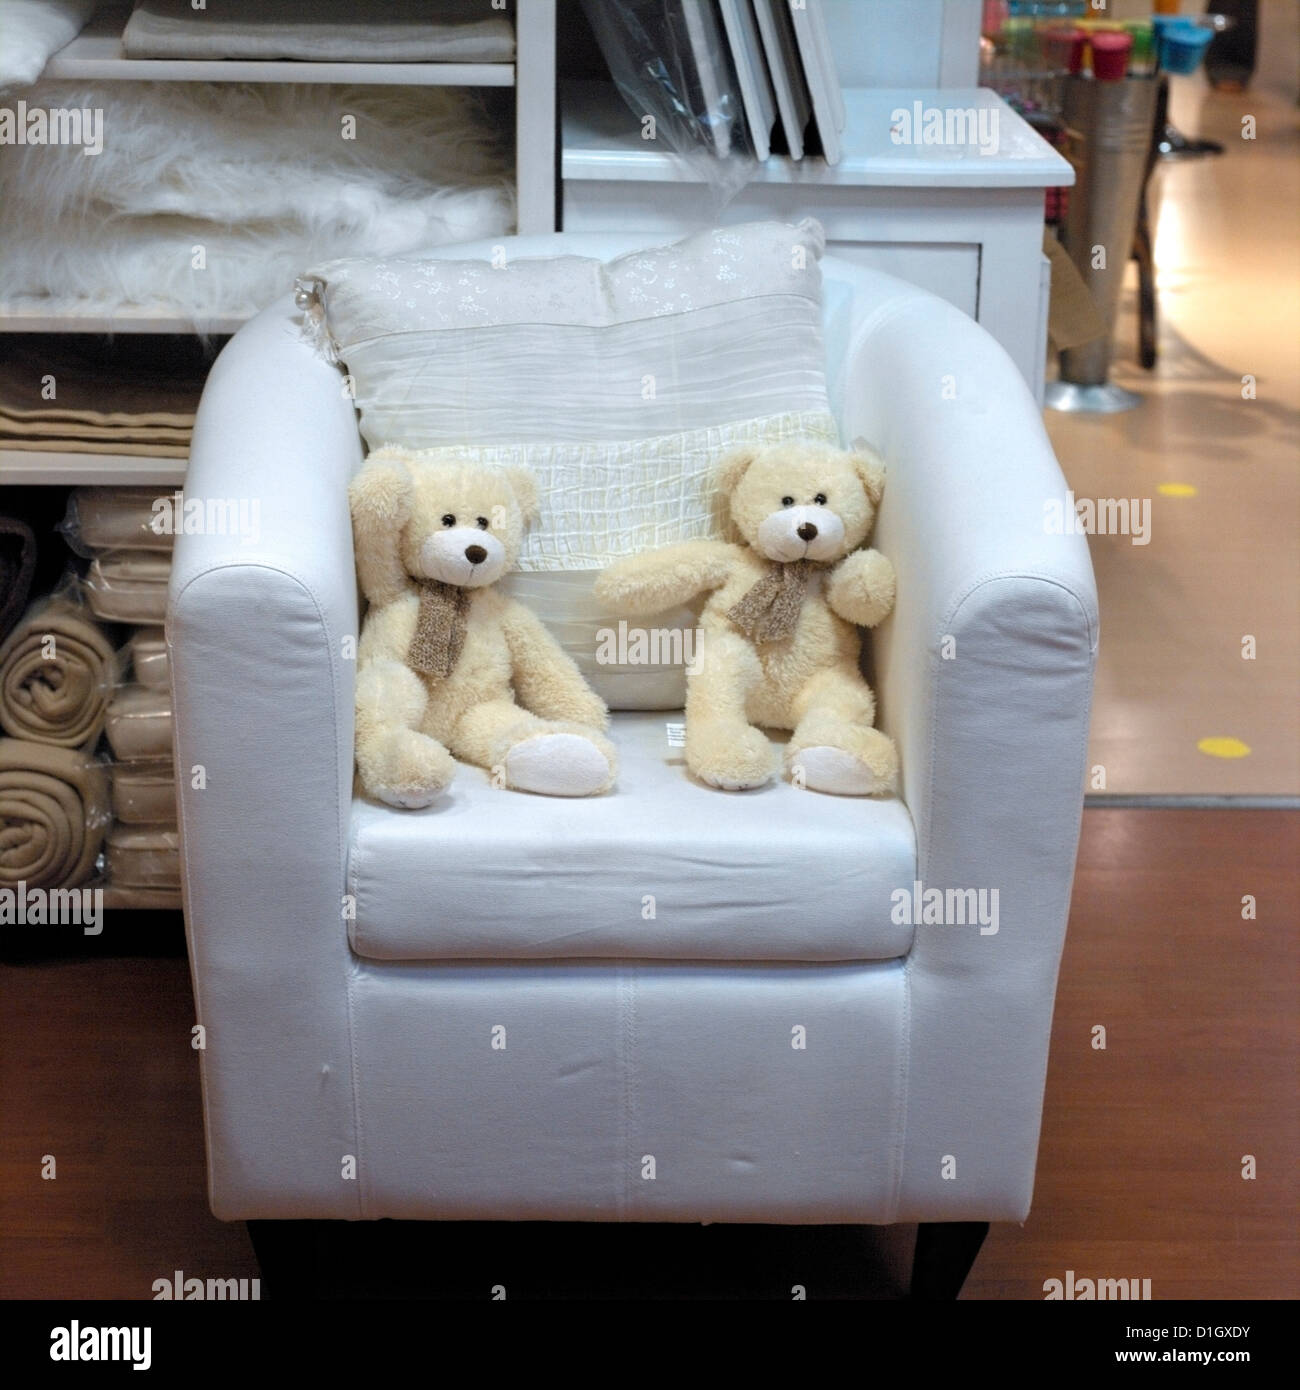 France Two White Teddy Bears in Armchair in Shop Stock Photo